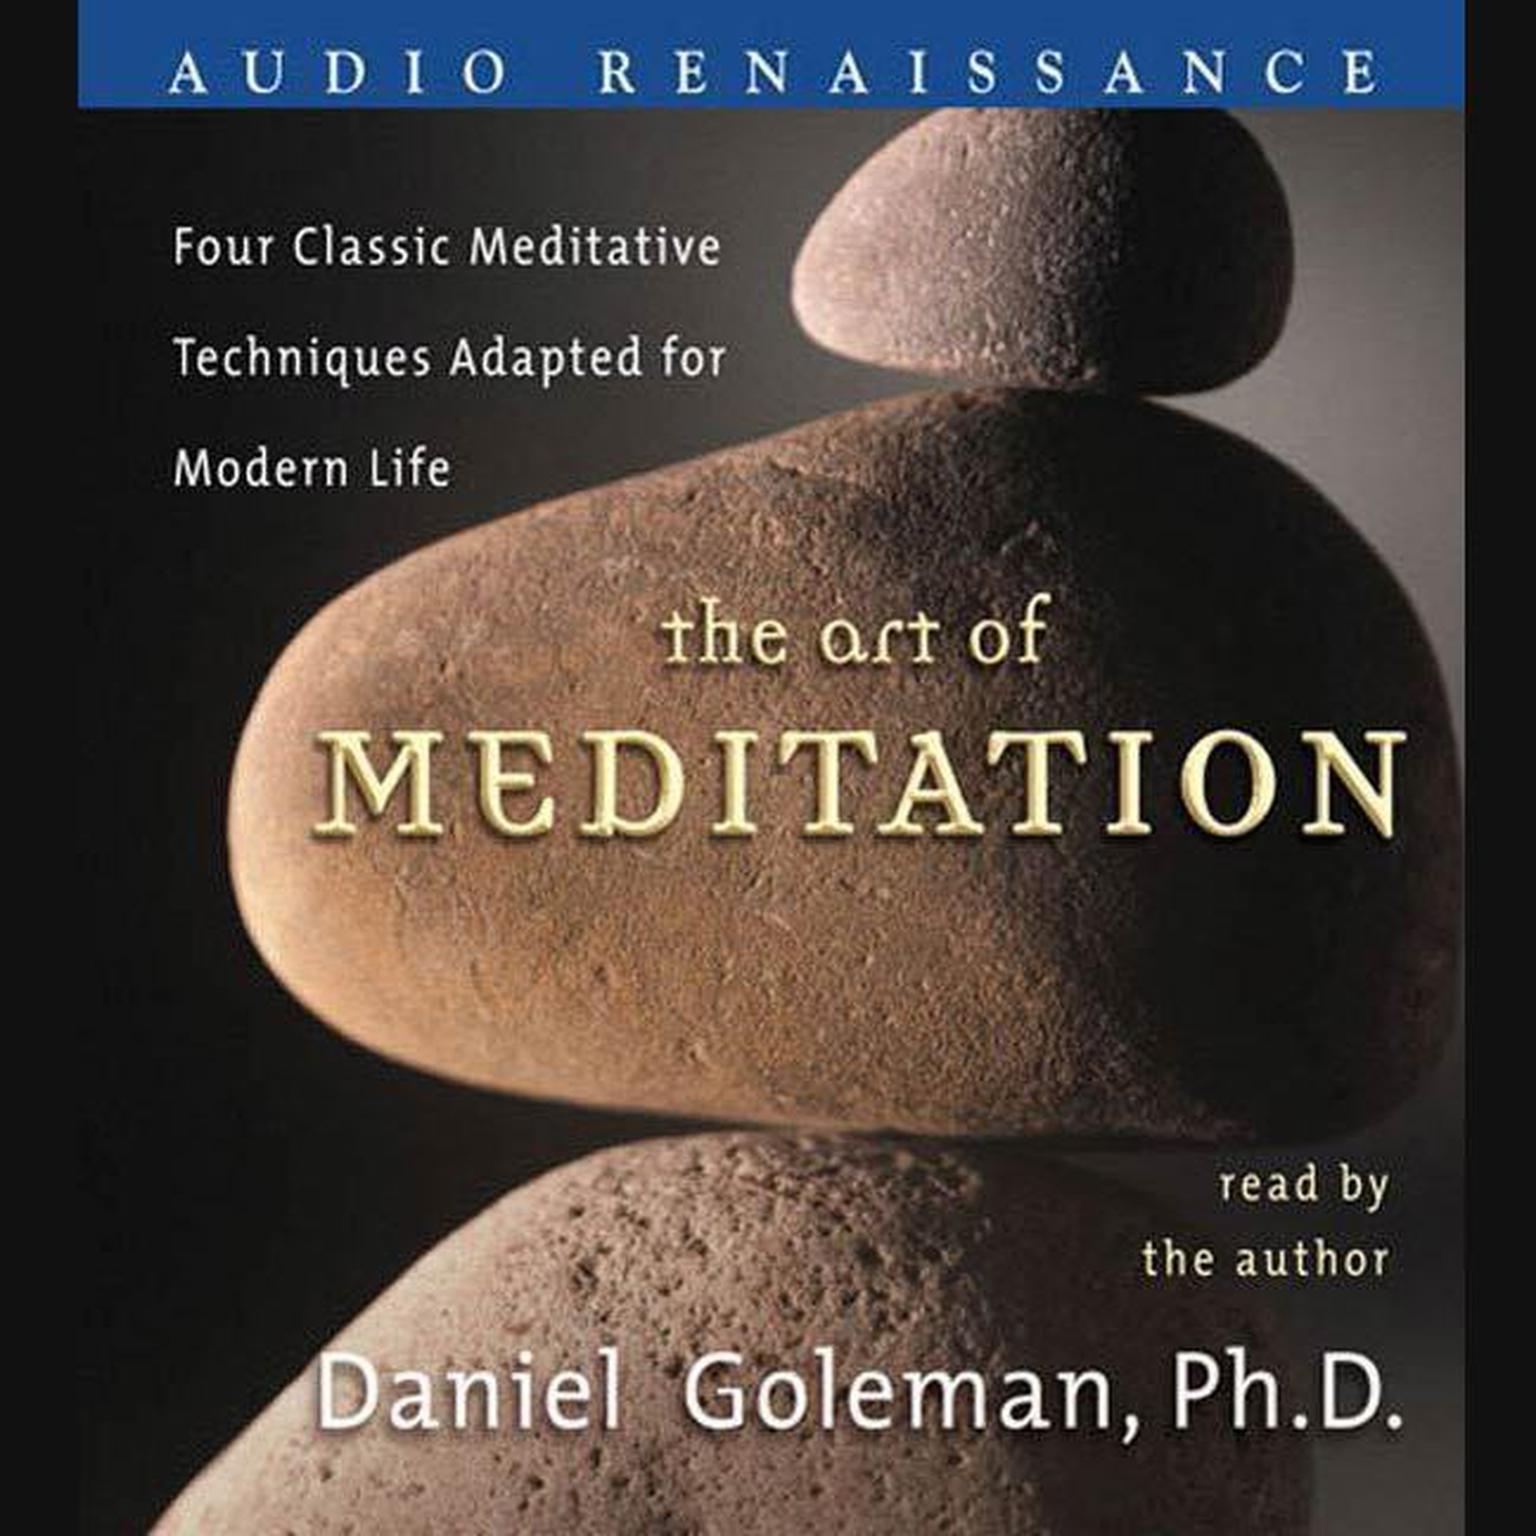 The Art of Meditation: Four Classic Meditative Techniques Adapted for Modern Life Audiobook, by Daniel Goleman